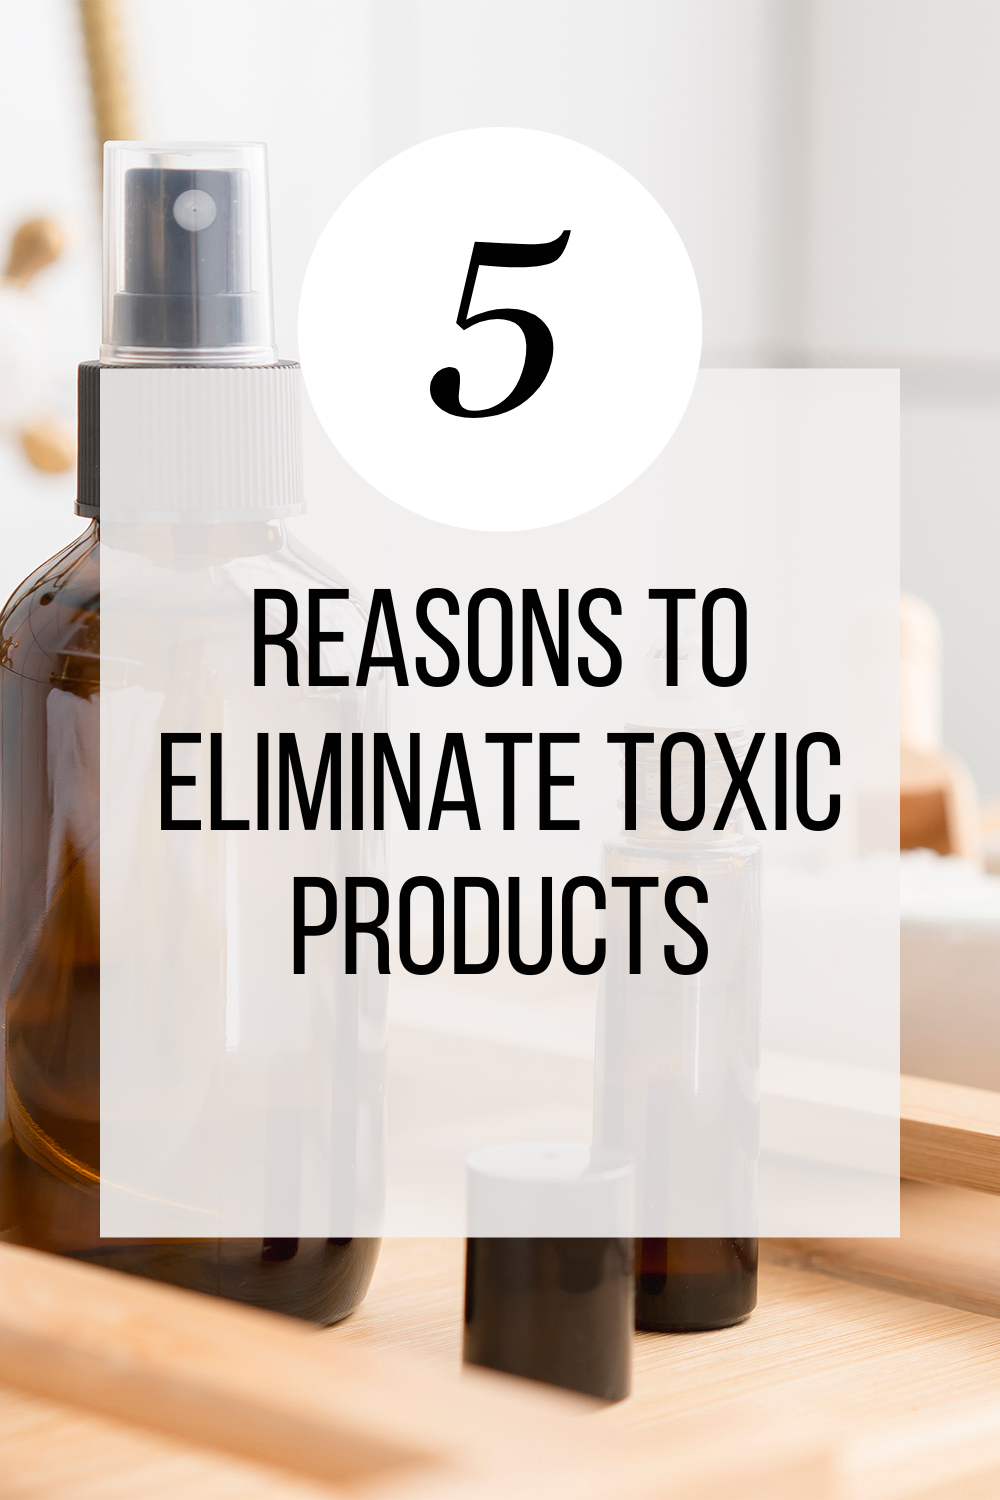 5 reasons to eliminate toxic products